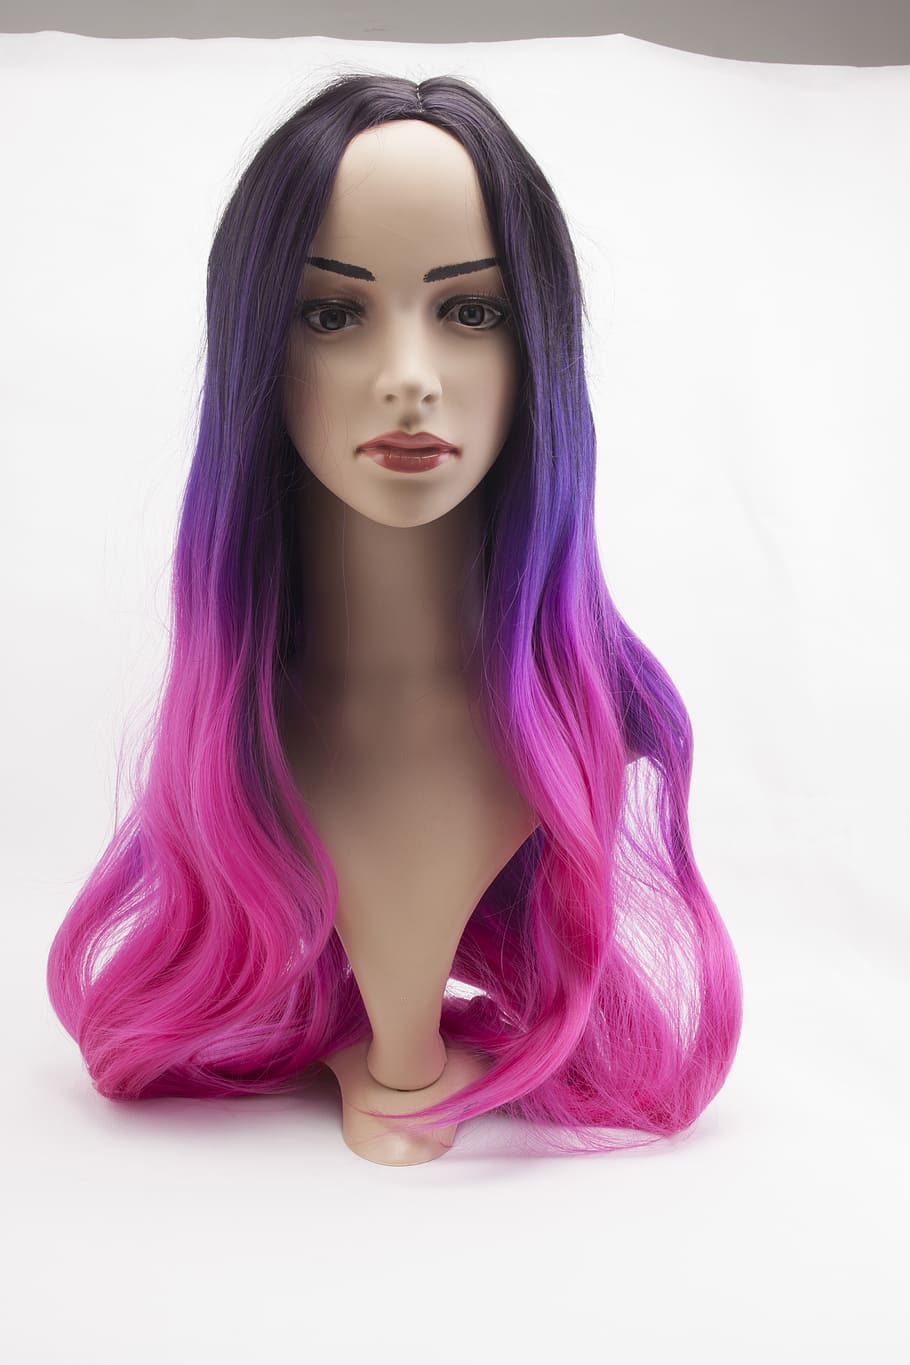 woman head mannequin, wig, mannequin head, cosplay, pink hair, artificial, model, indoors, white background, hairstyle